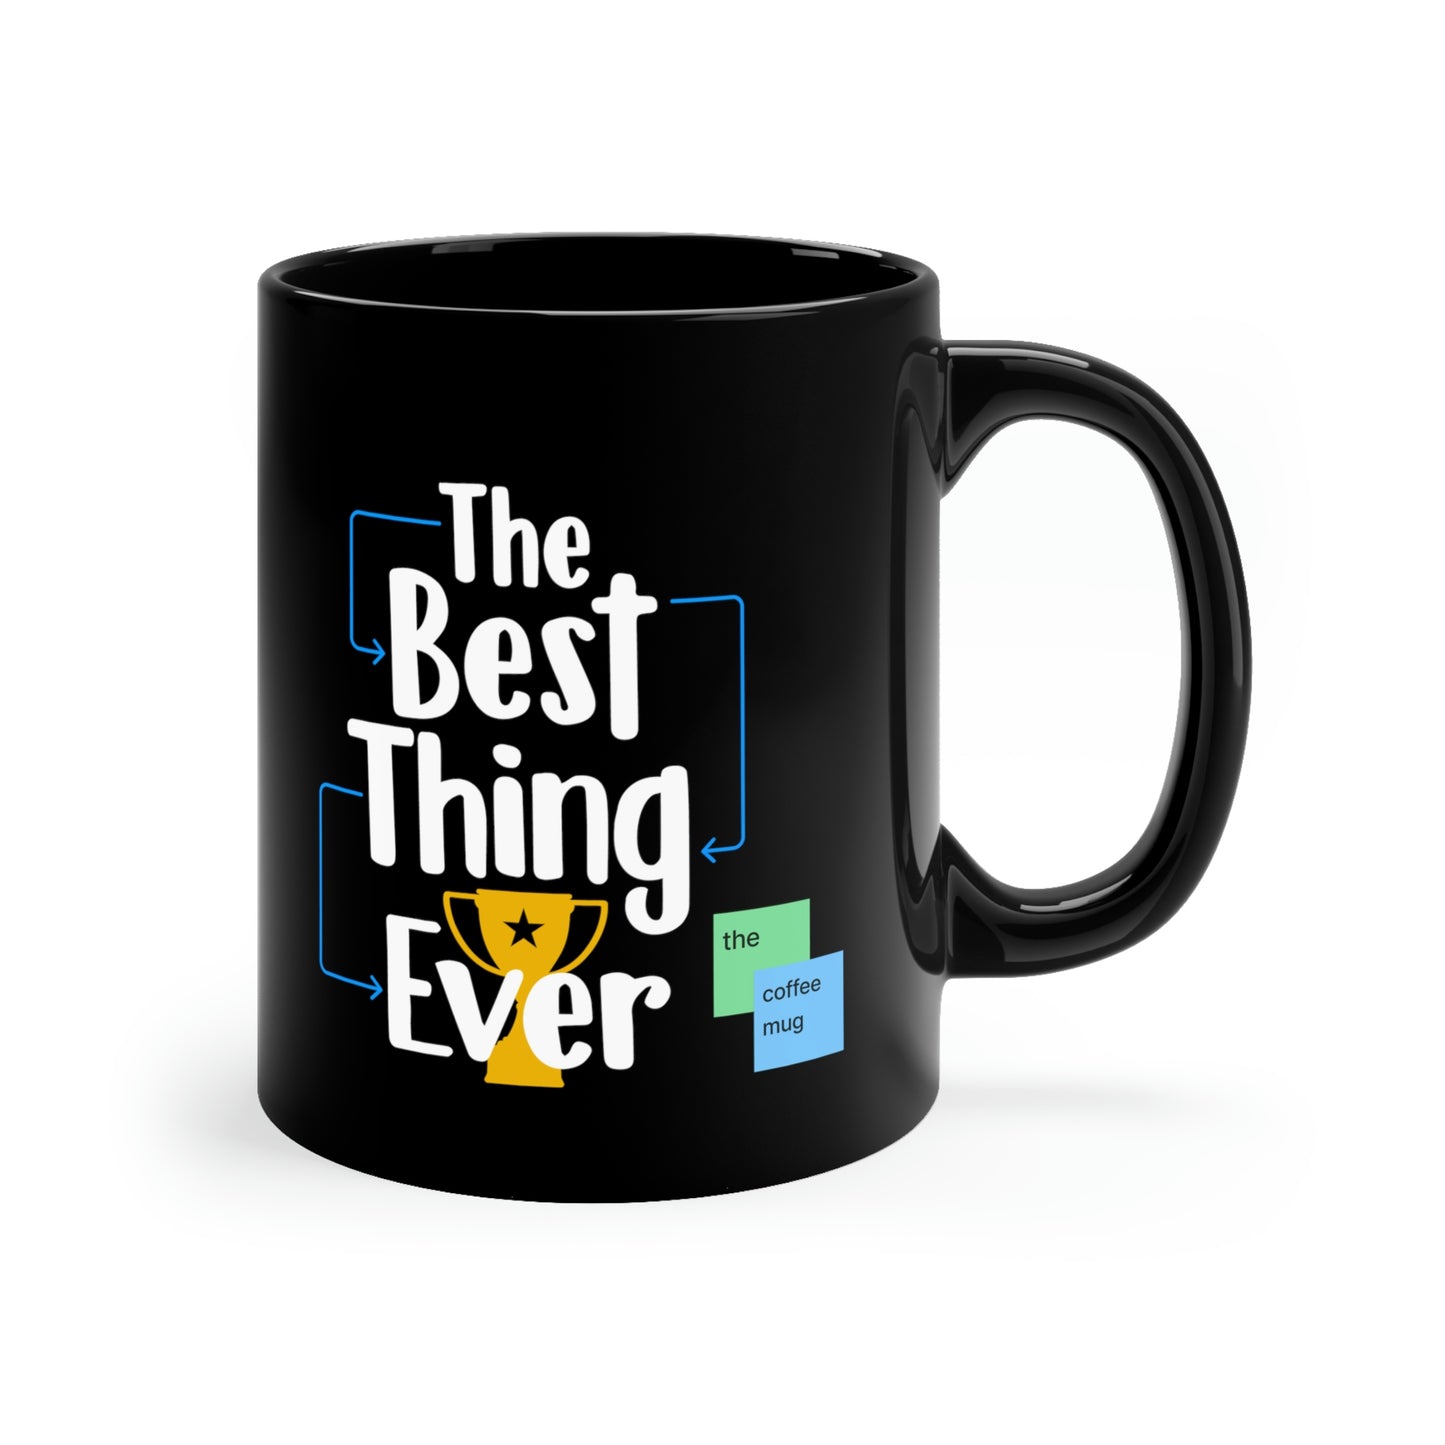 The Best Thing Ever: The Mug (black)